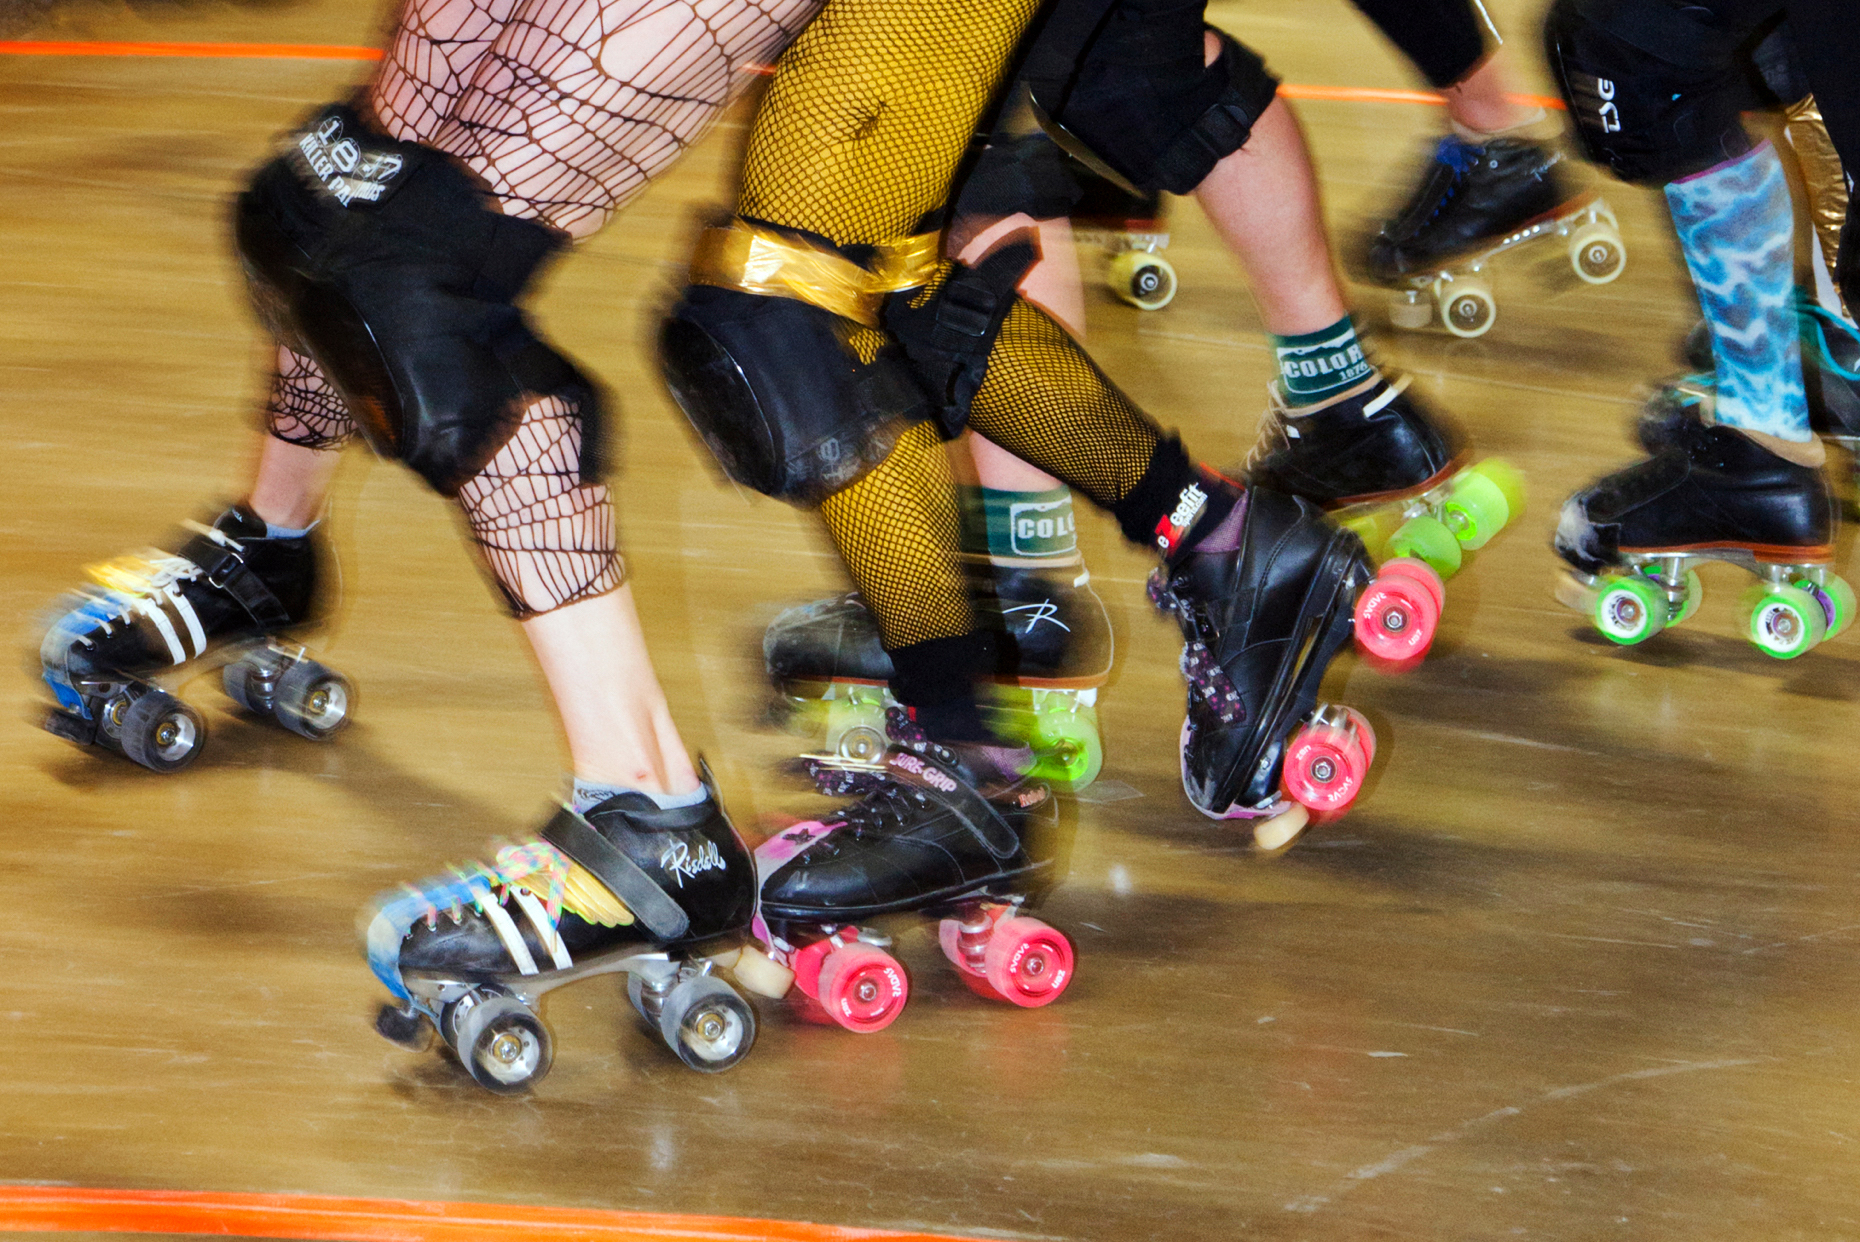 Women compete in the Ark Valley High Rollers Roller Derby, Chaffee County Fairgrounds, Colorado, USA